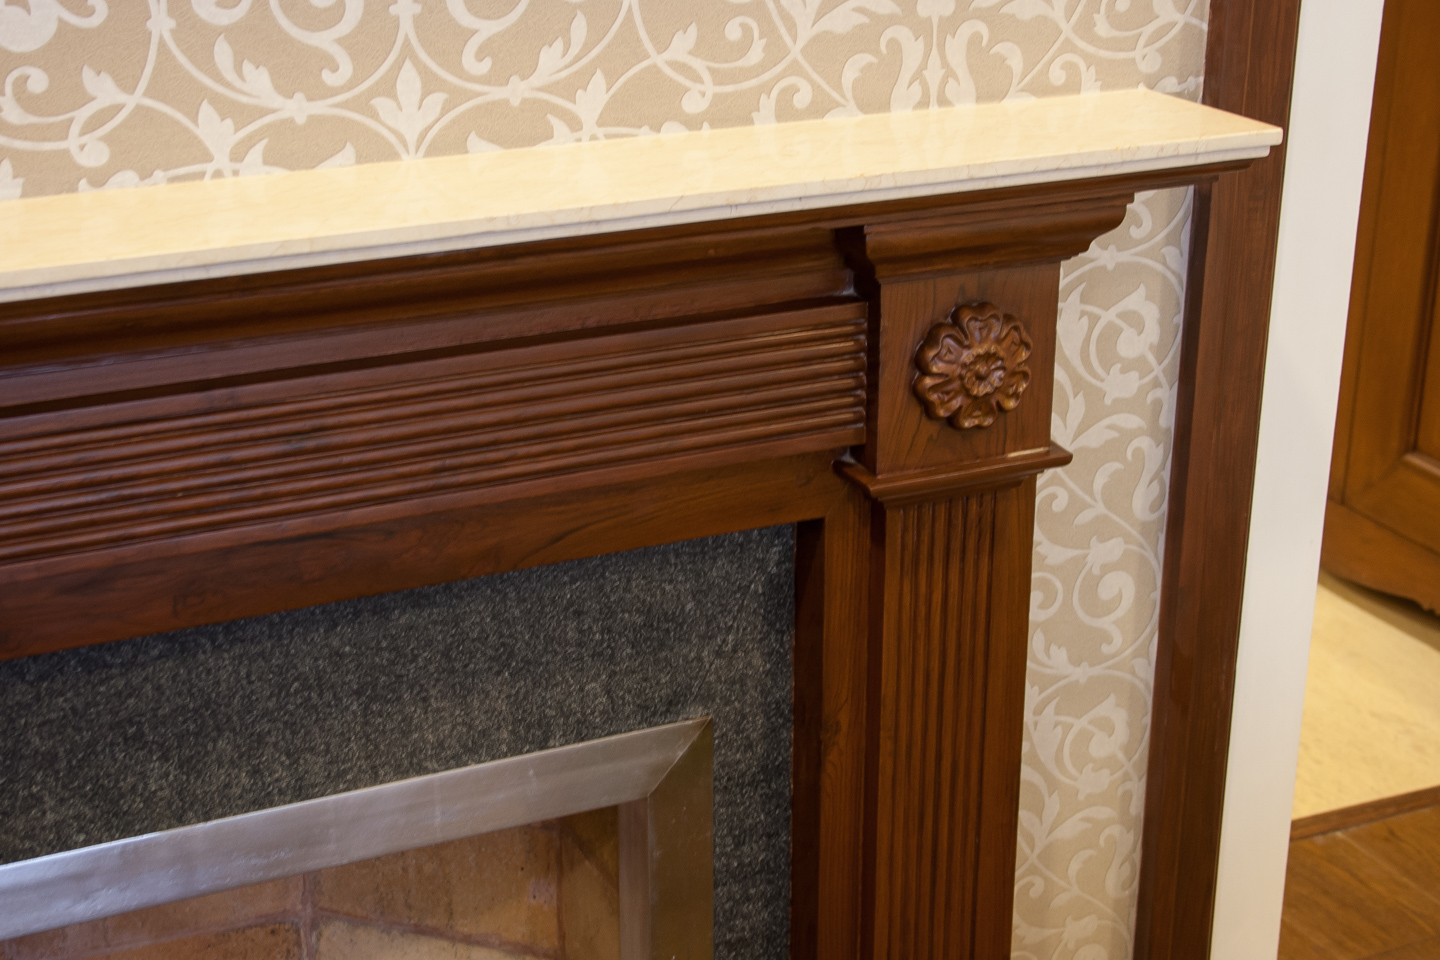 The fireplace is faced with flamed granite. The surround is of carved wood and the mantlepiece is polished marble.